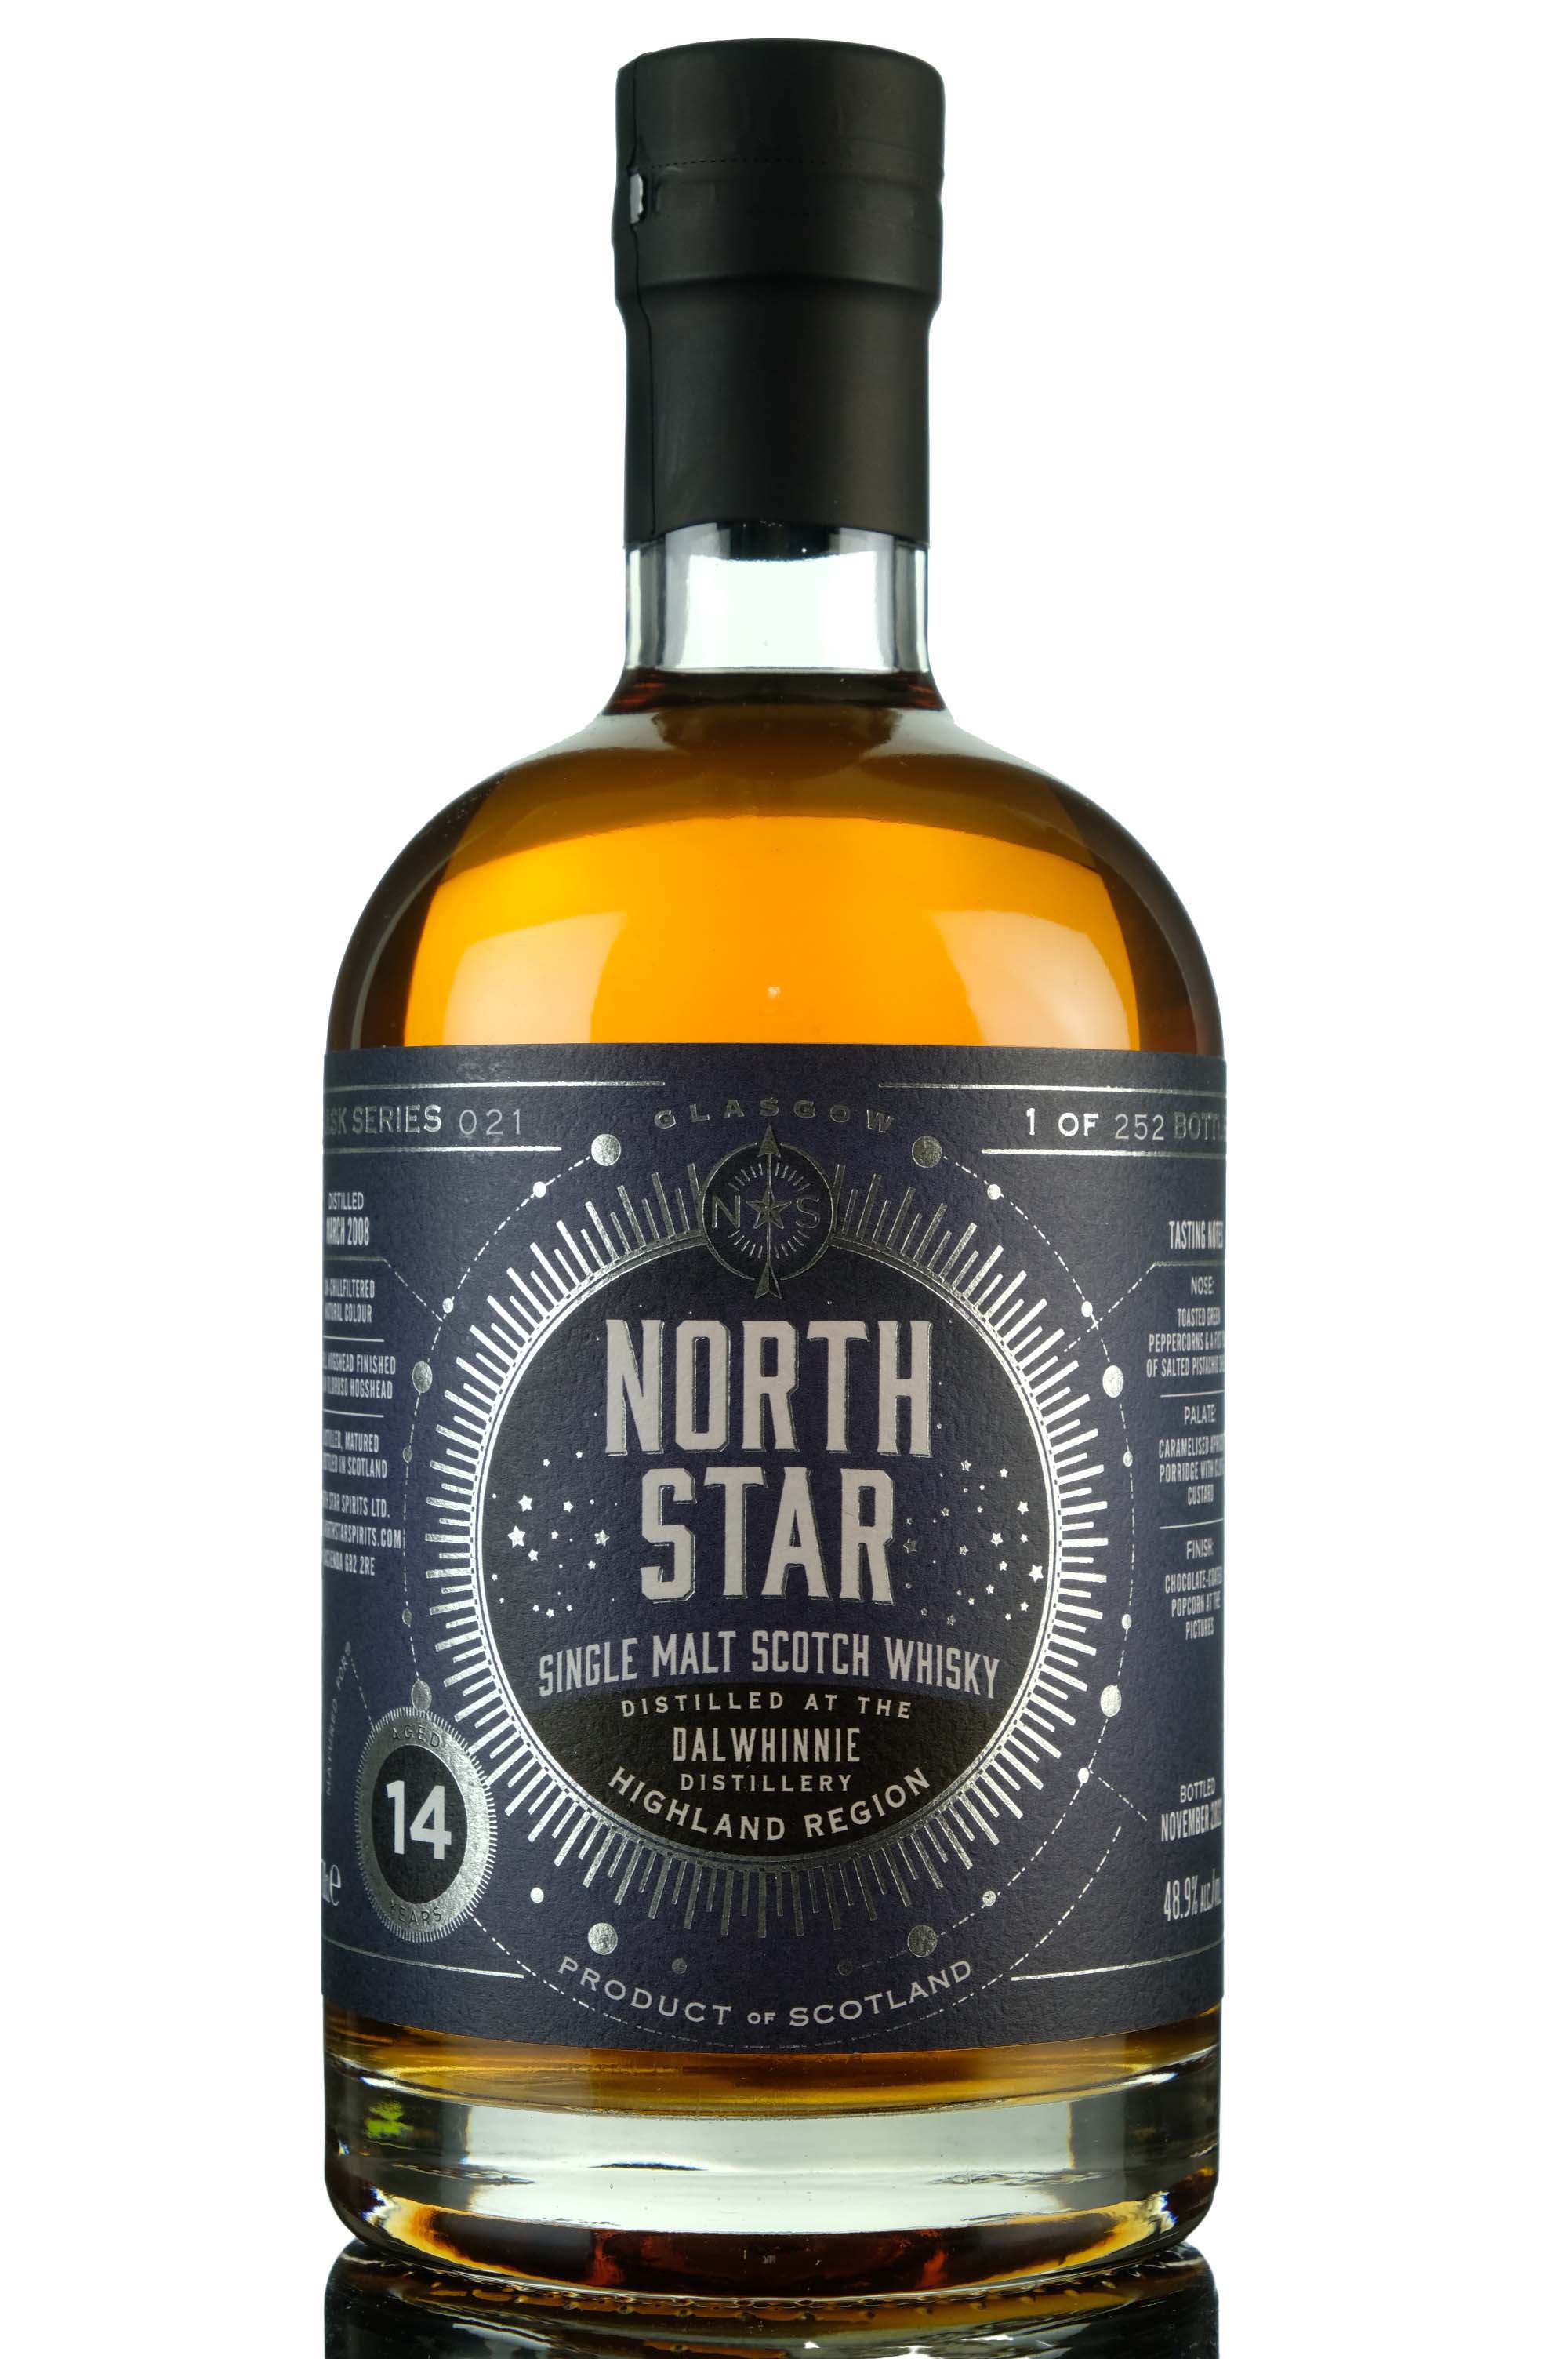 Dalwhinnie 2008-2022 - 14 Year Old - North Star Spirits - Cask Series 021 - Single Cask